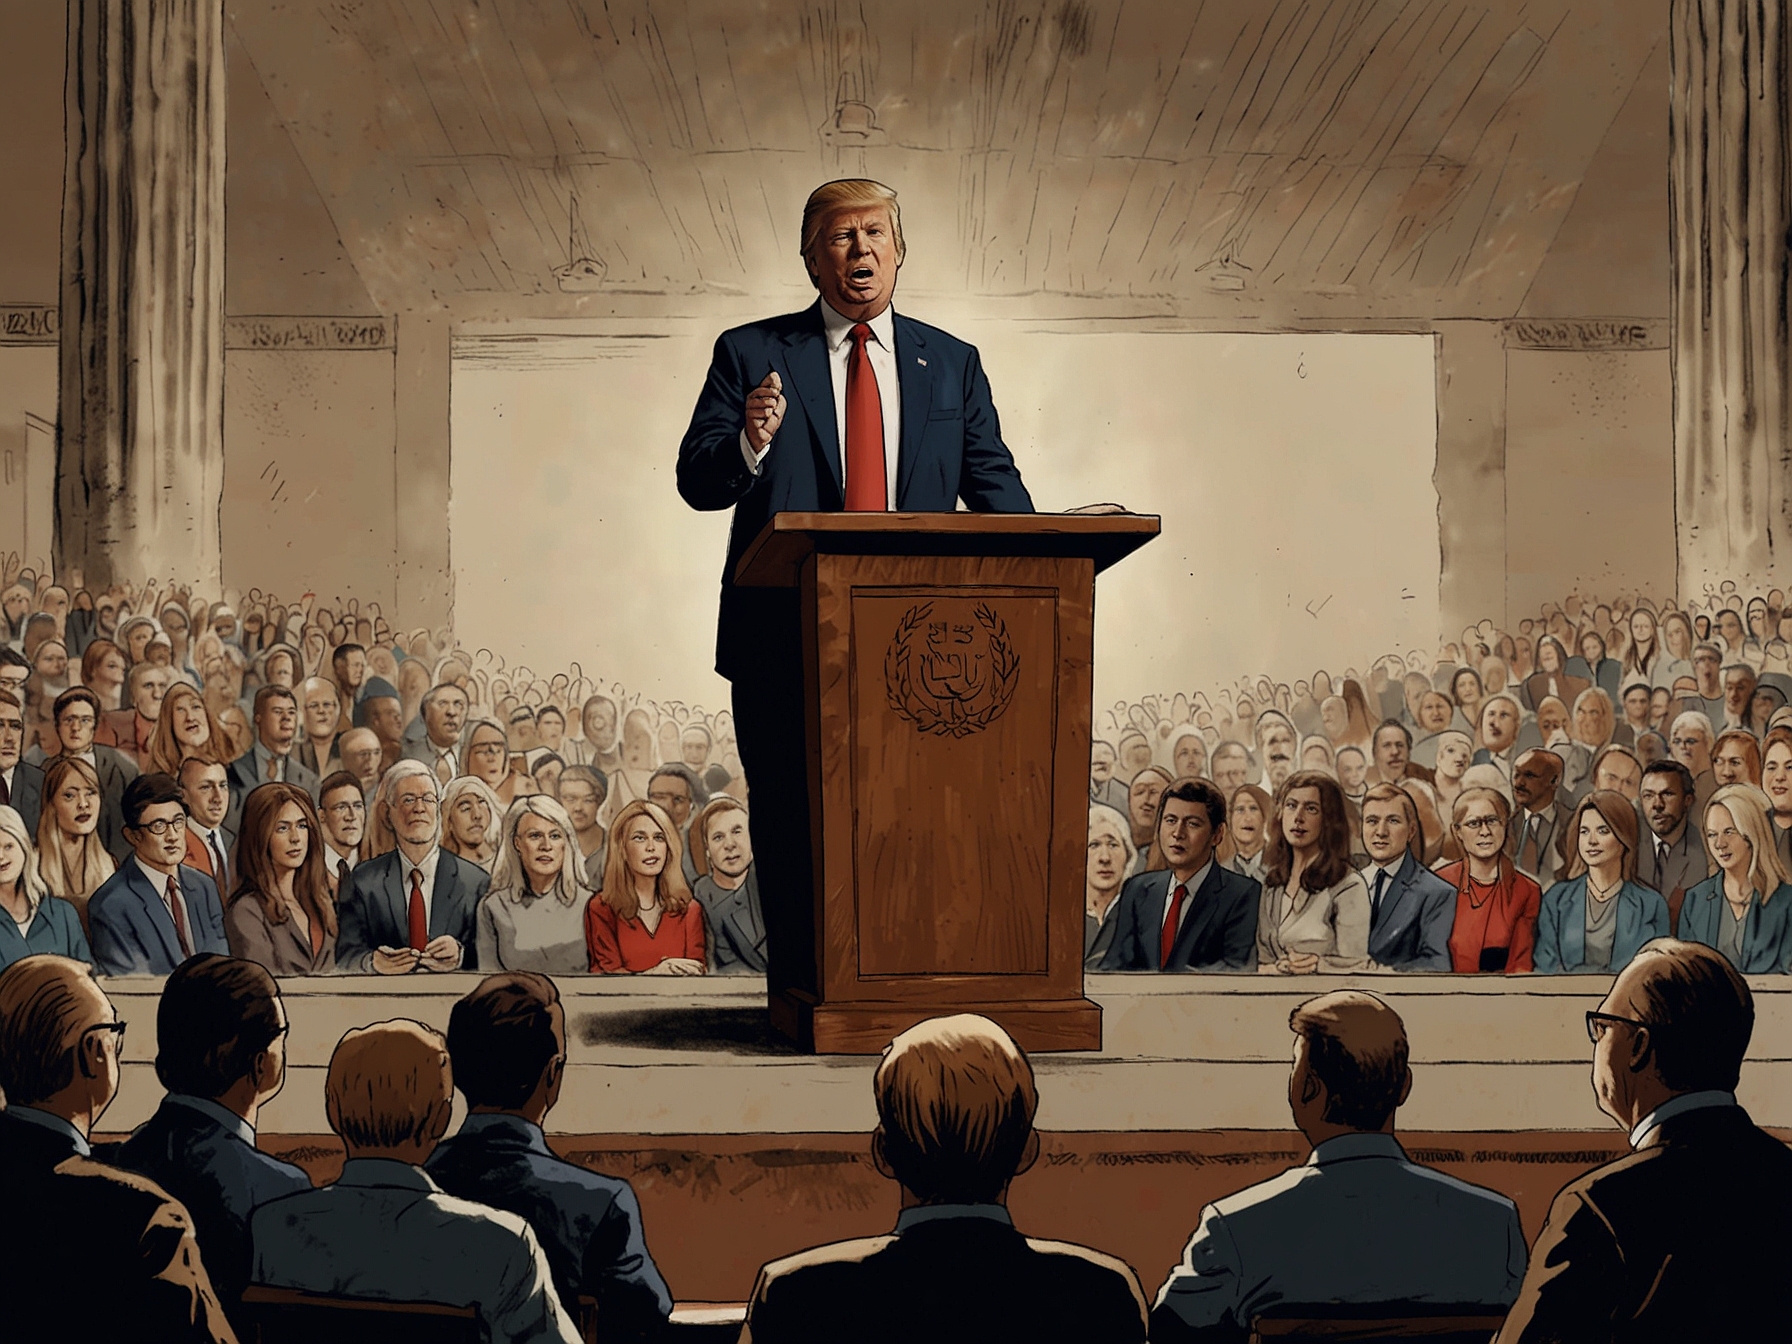 Trump delivers a speech at an Evangelical event, with a backdrop of Ten Commandments, signaling his support for religious symbols in public schools, receiving applause from the crowd.